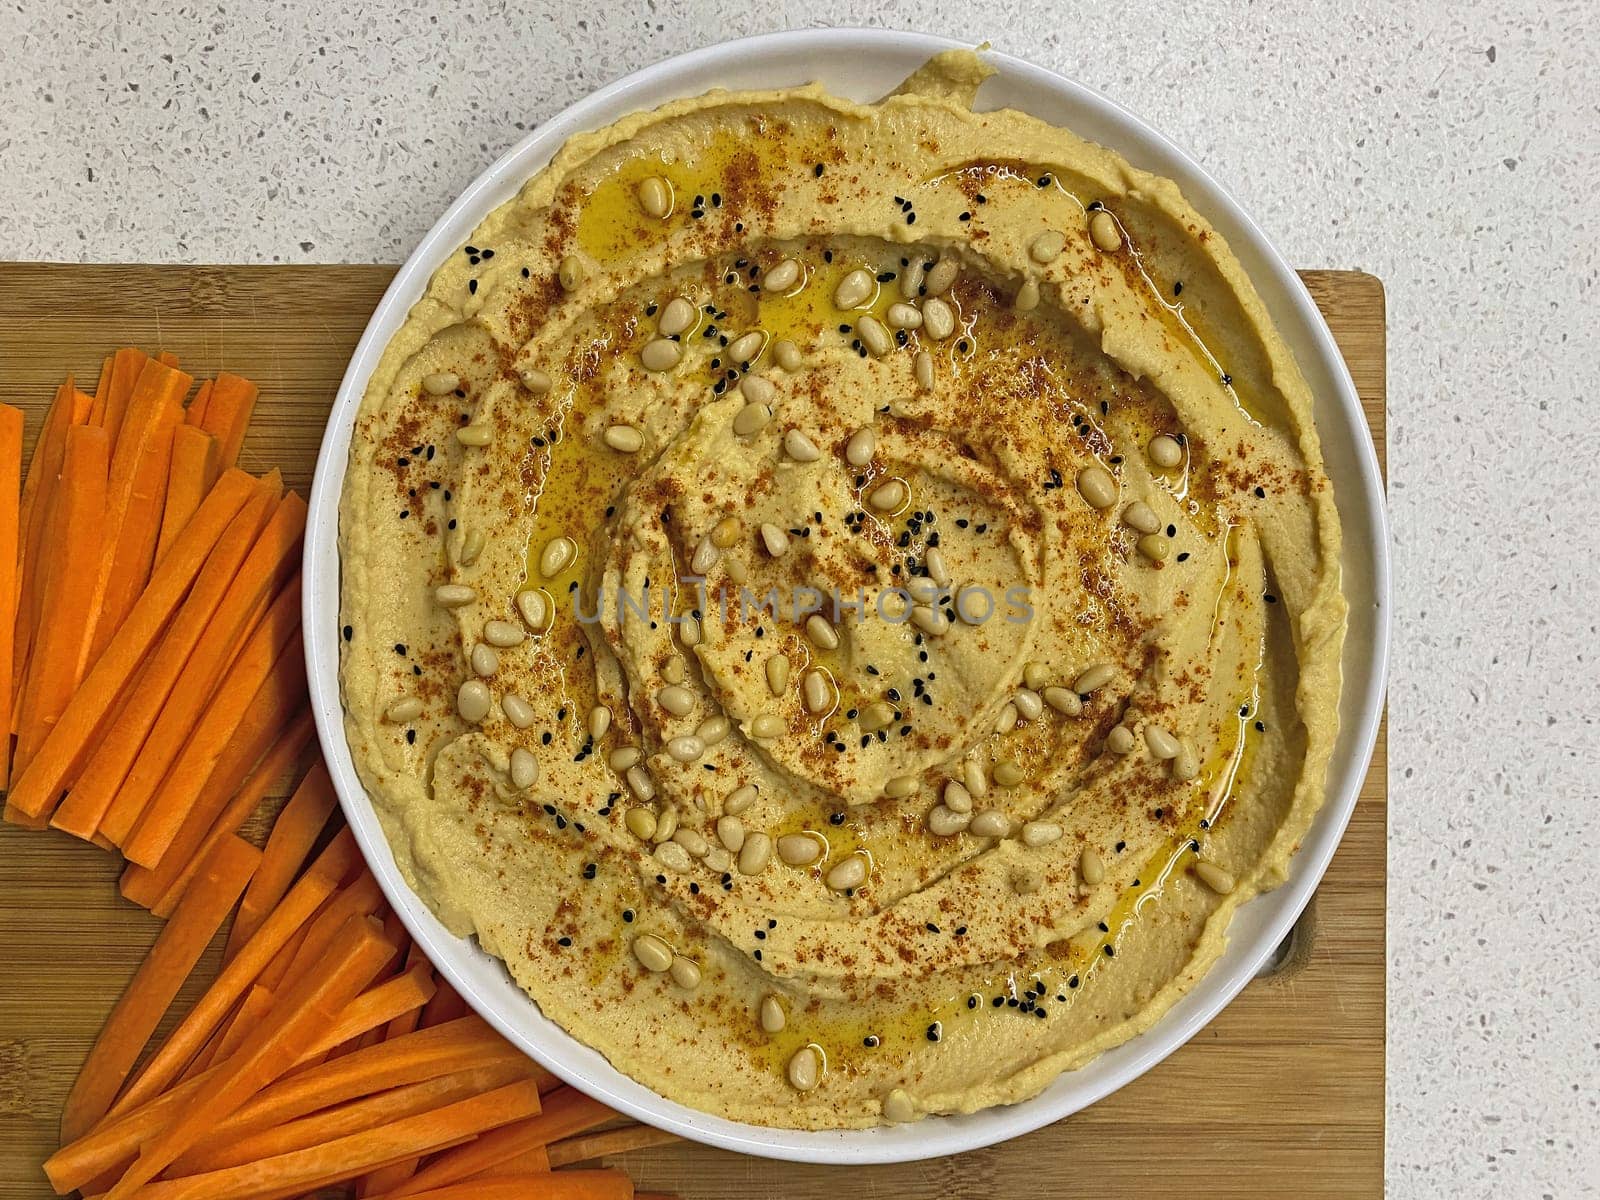 Homemade hummus with a piece of fresh carrot by Proxima13